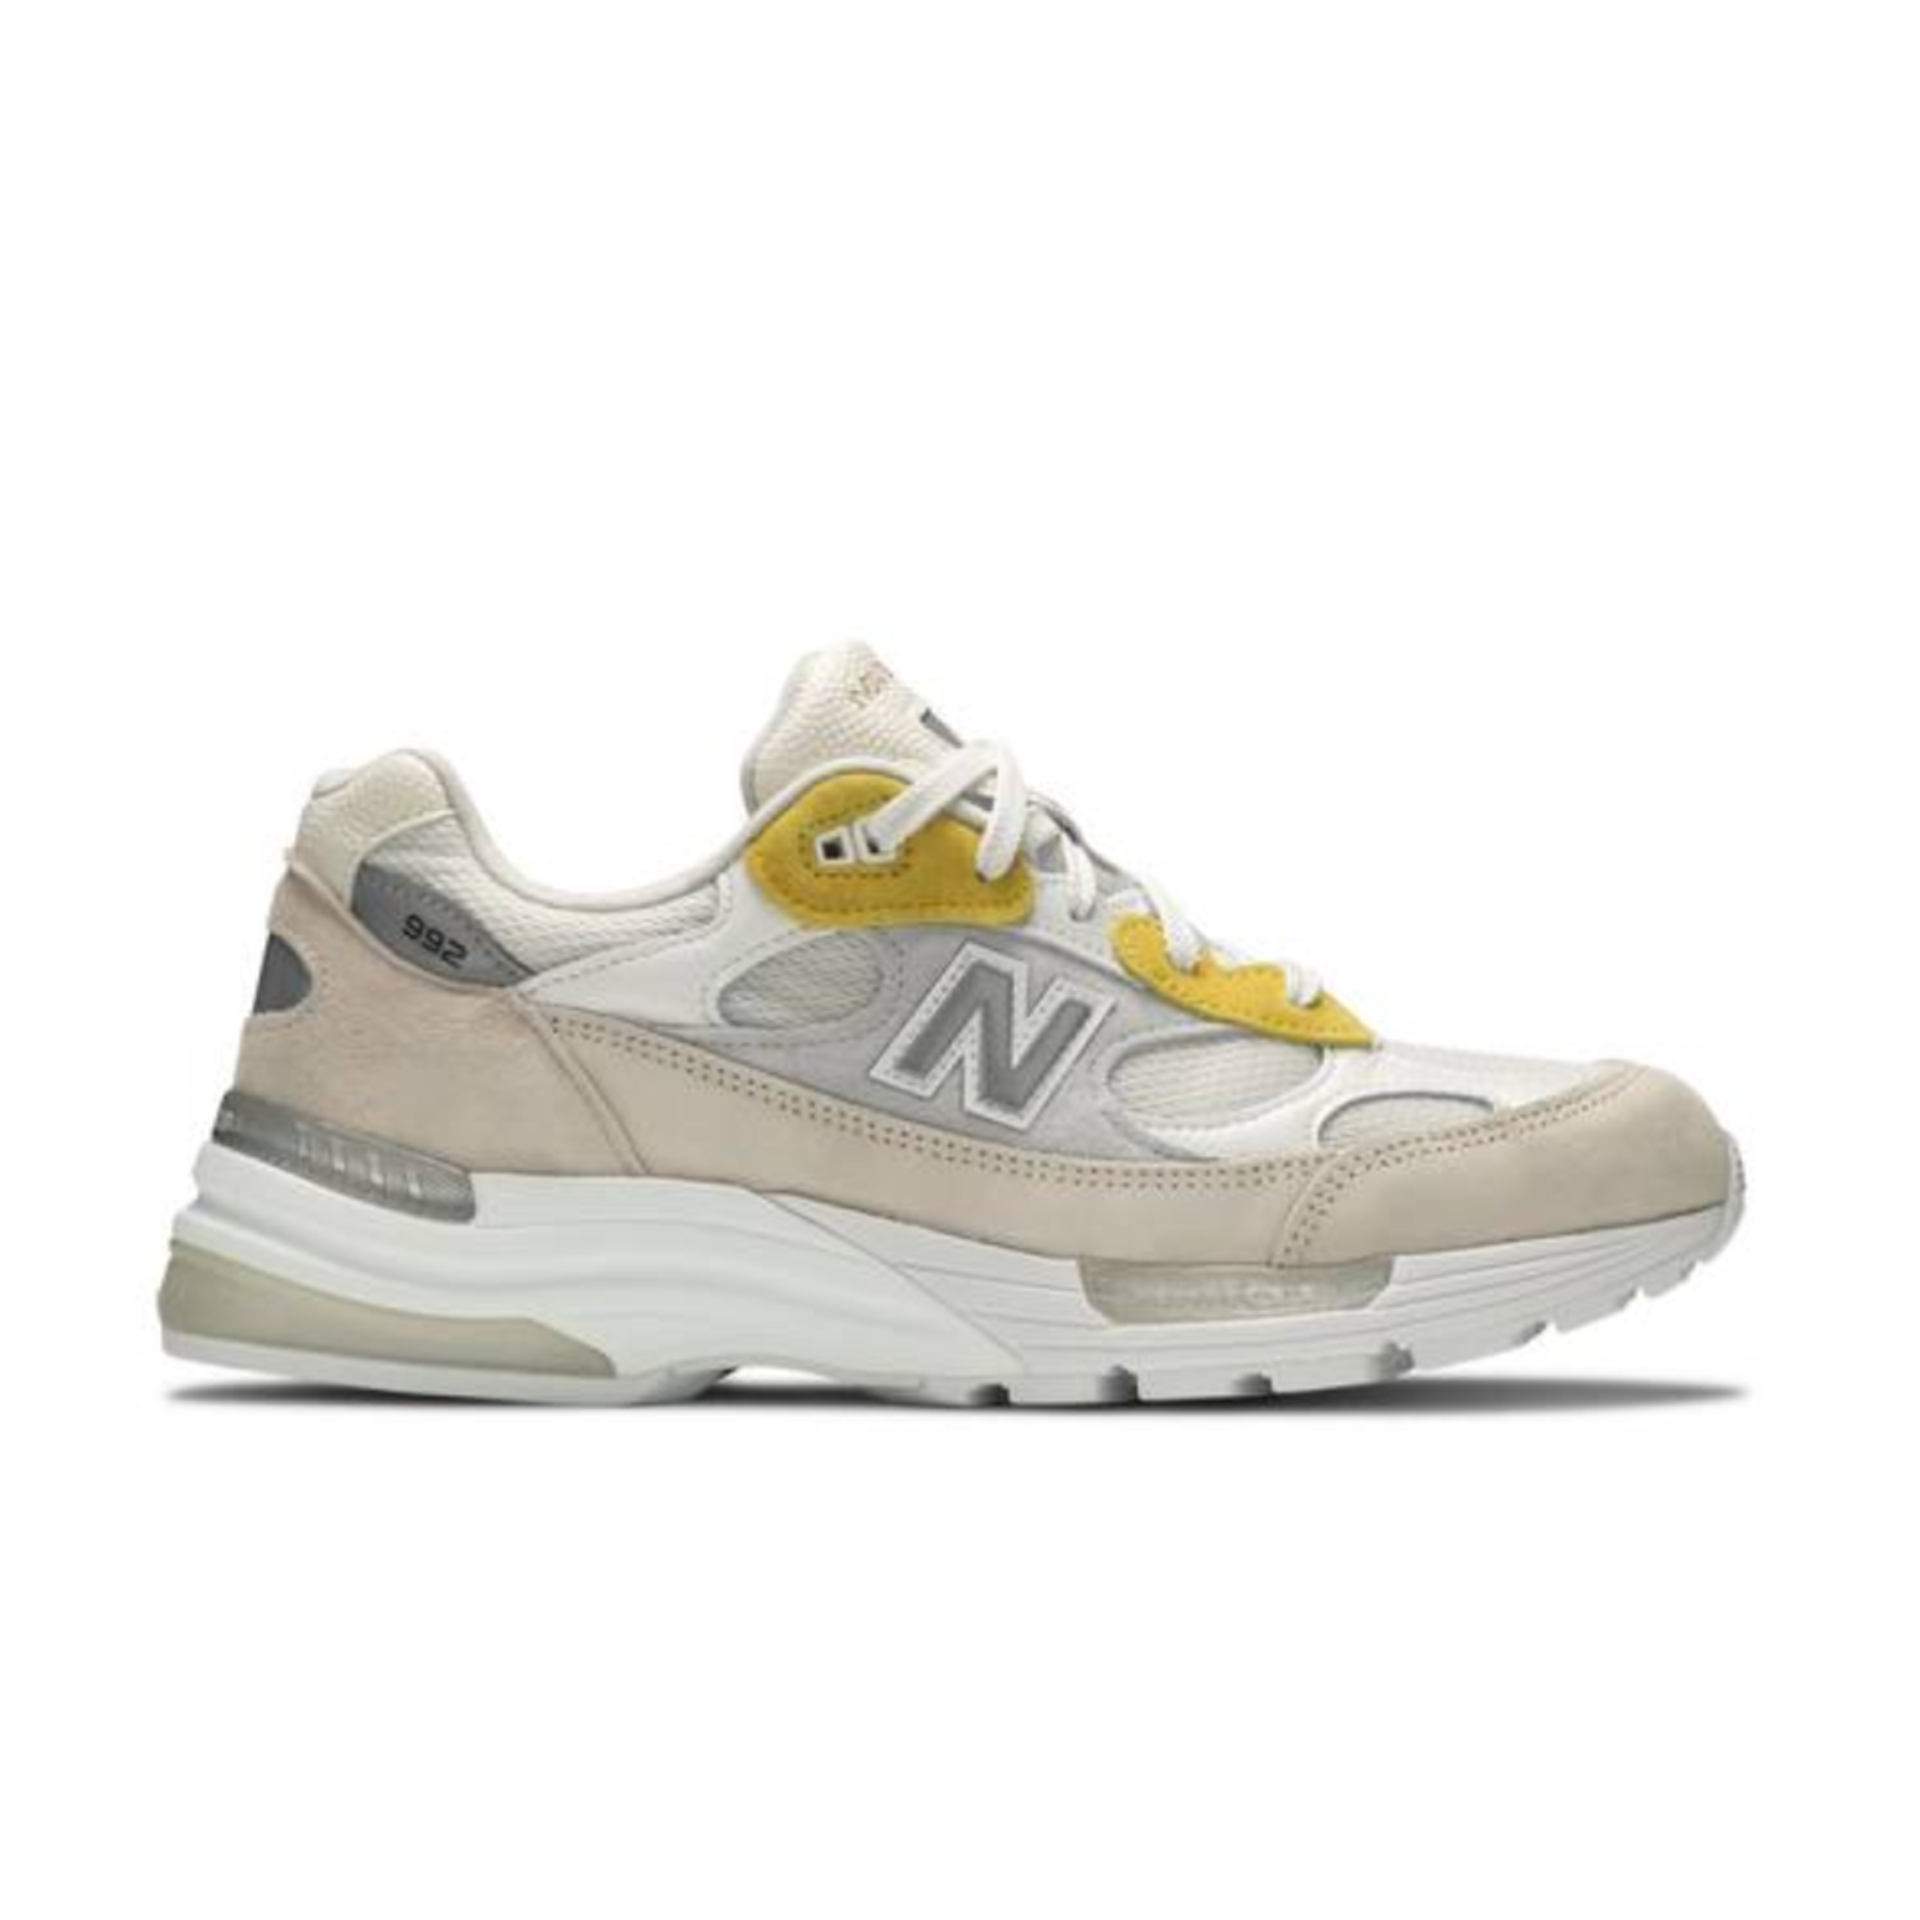 New Balance Paperboy Paris x 992 Made in USA 'Fried Egg'